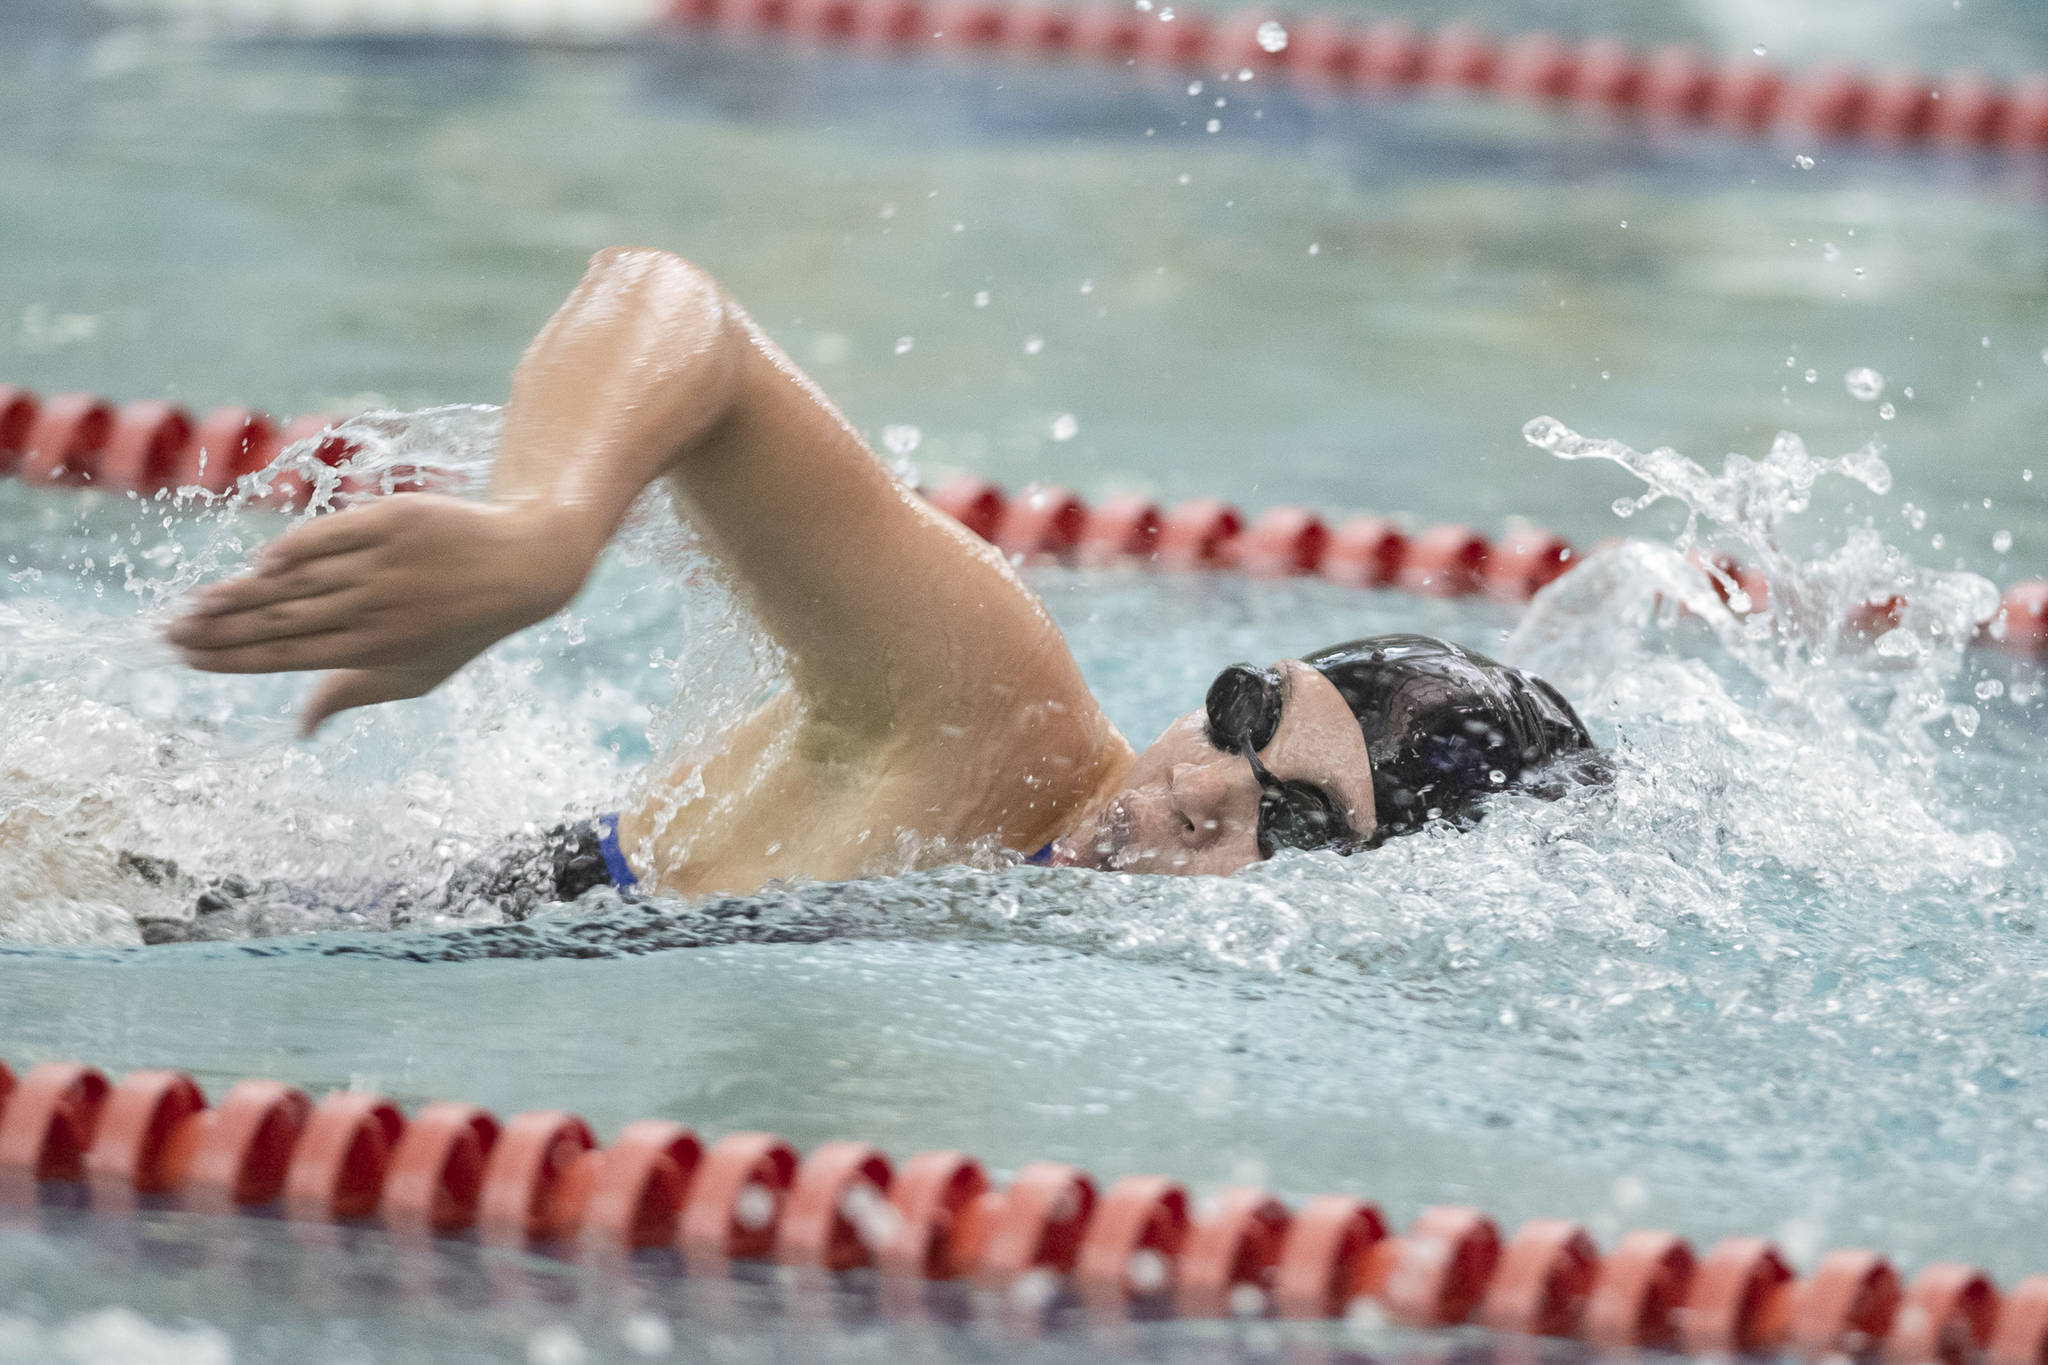 Thunder Mountain’s Nancy Liddle competes in the 200 Yard Freestyle at the Juneau Invitational Swim Meet at the Dimond Park Aquatic Center on Friday, Sept. 20, 2019. (Michael Penn | Juneau Empire)